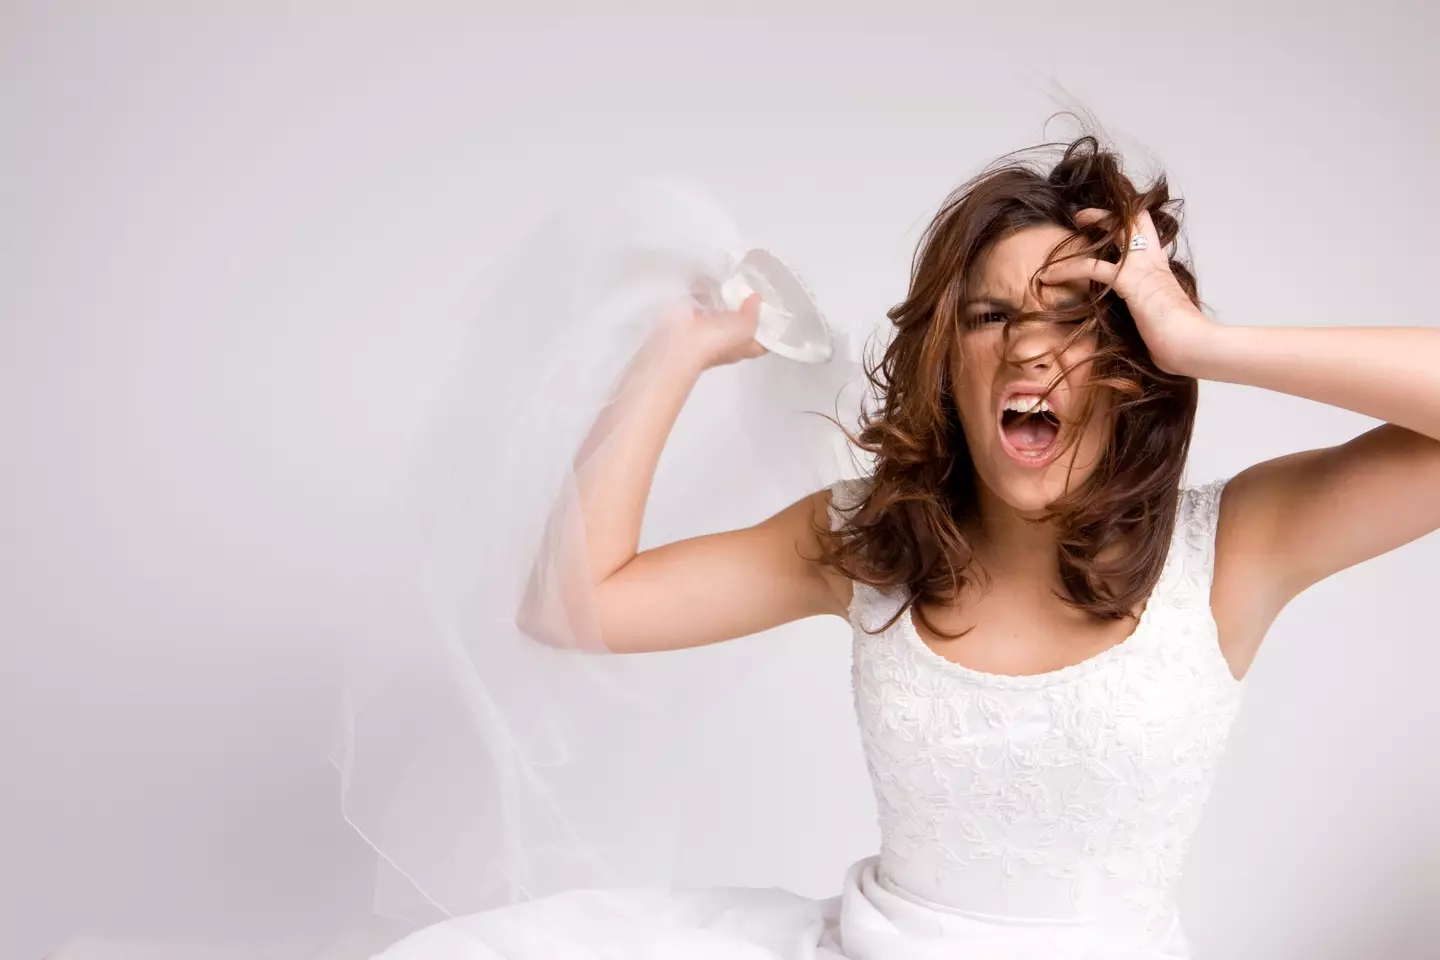 A member of the bridal party exposed the bride's antics on Reddit (stock image).